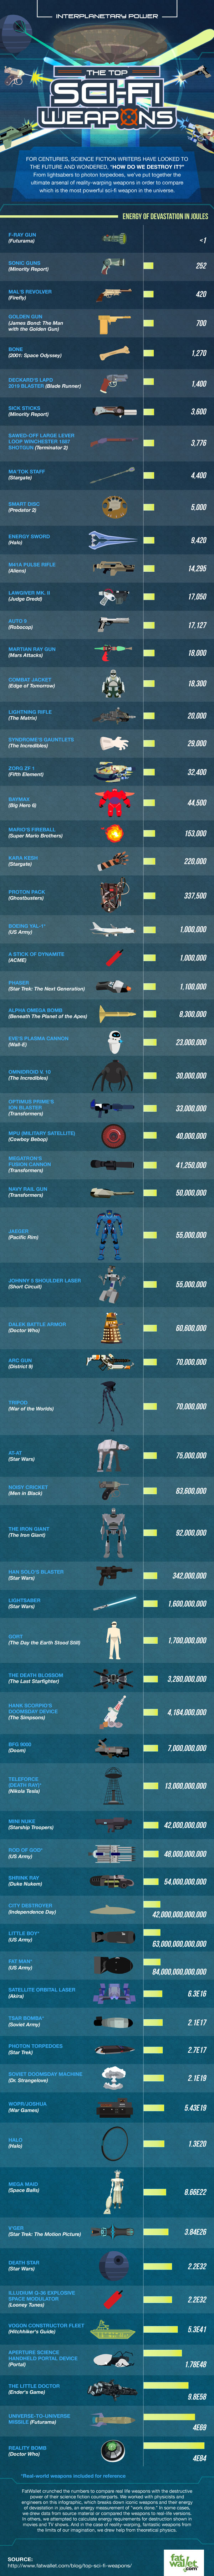 The Top Sci-Fi Weapons in the Universe